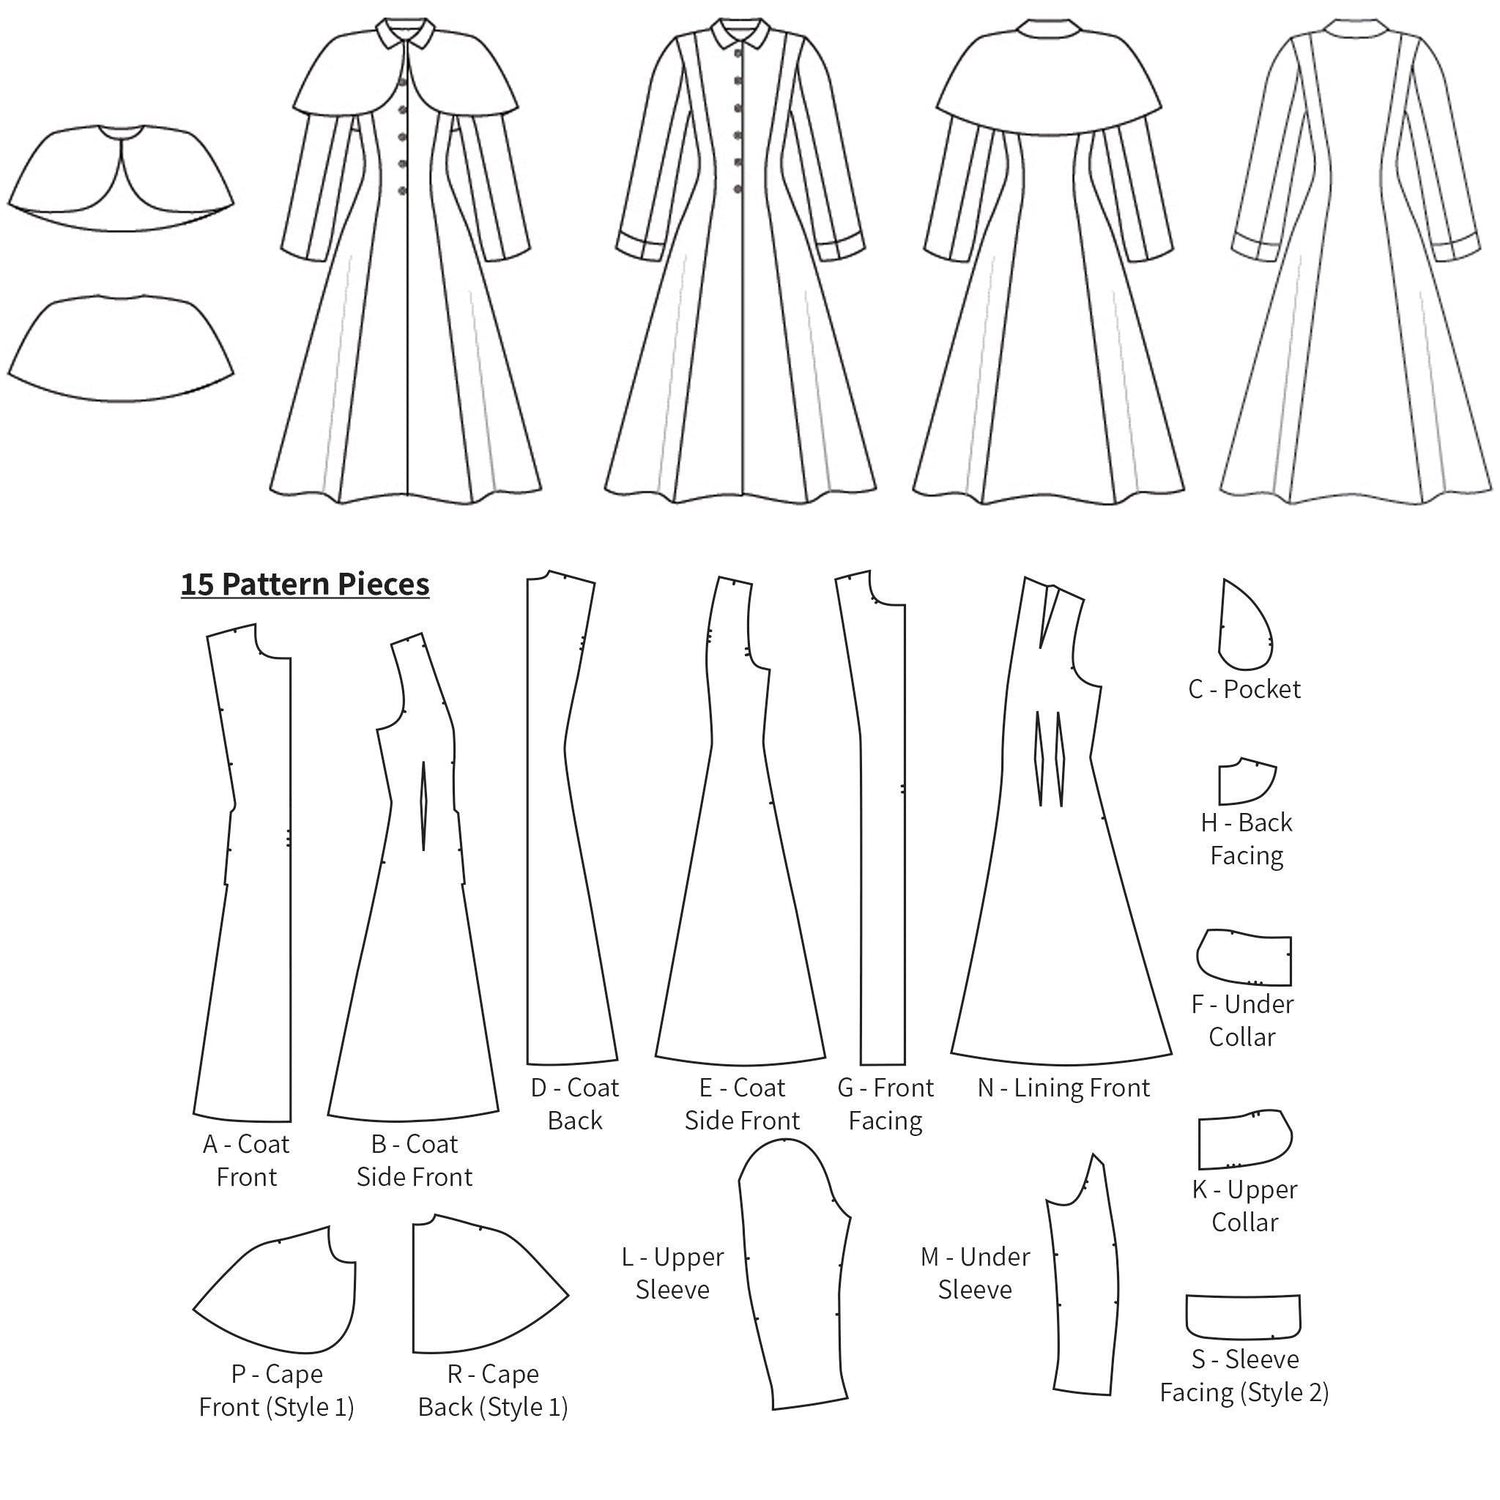 1940's Clara Cape Coat with Detachable Cape - lined drawings